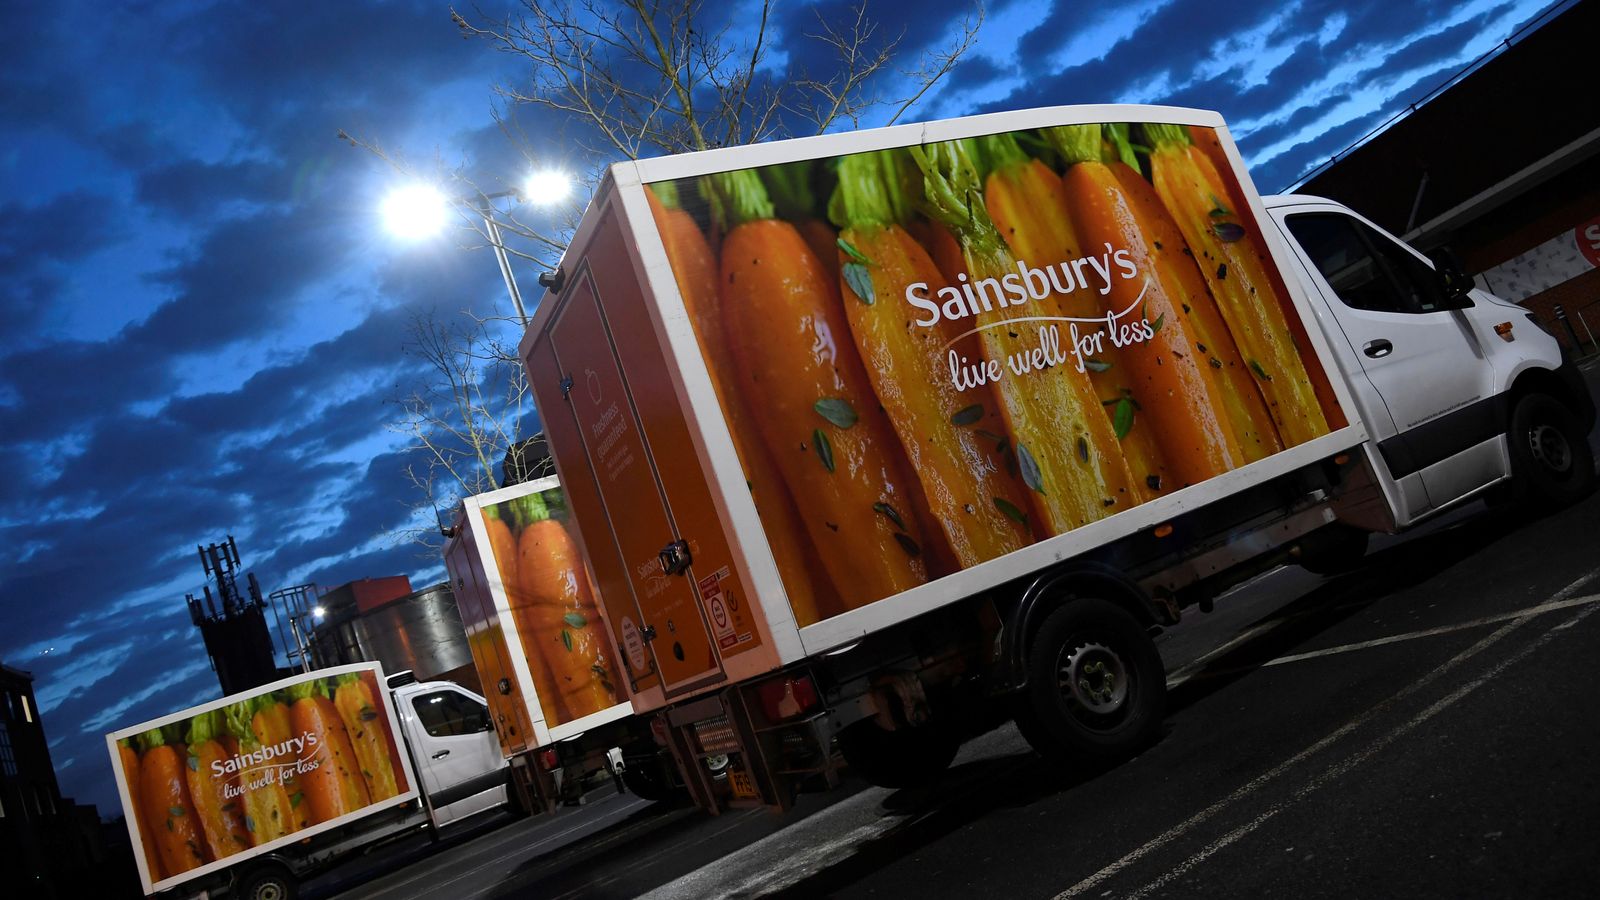 Sainsbury's unable to fulfil 'vast majority' of online deliveries after suffering 'technical issues'